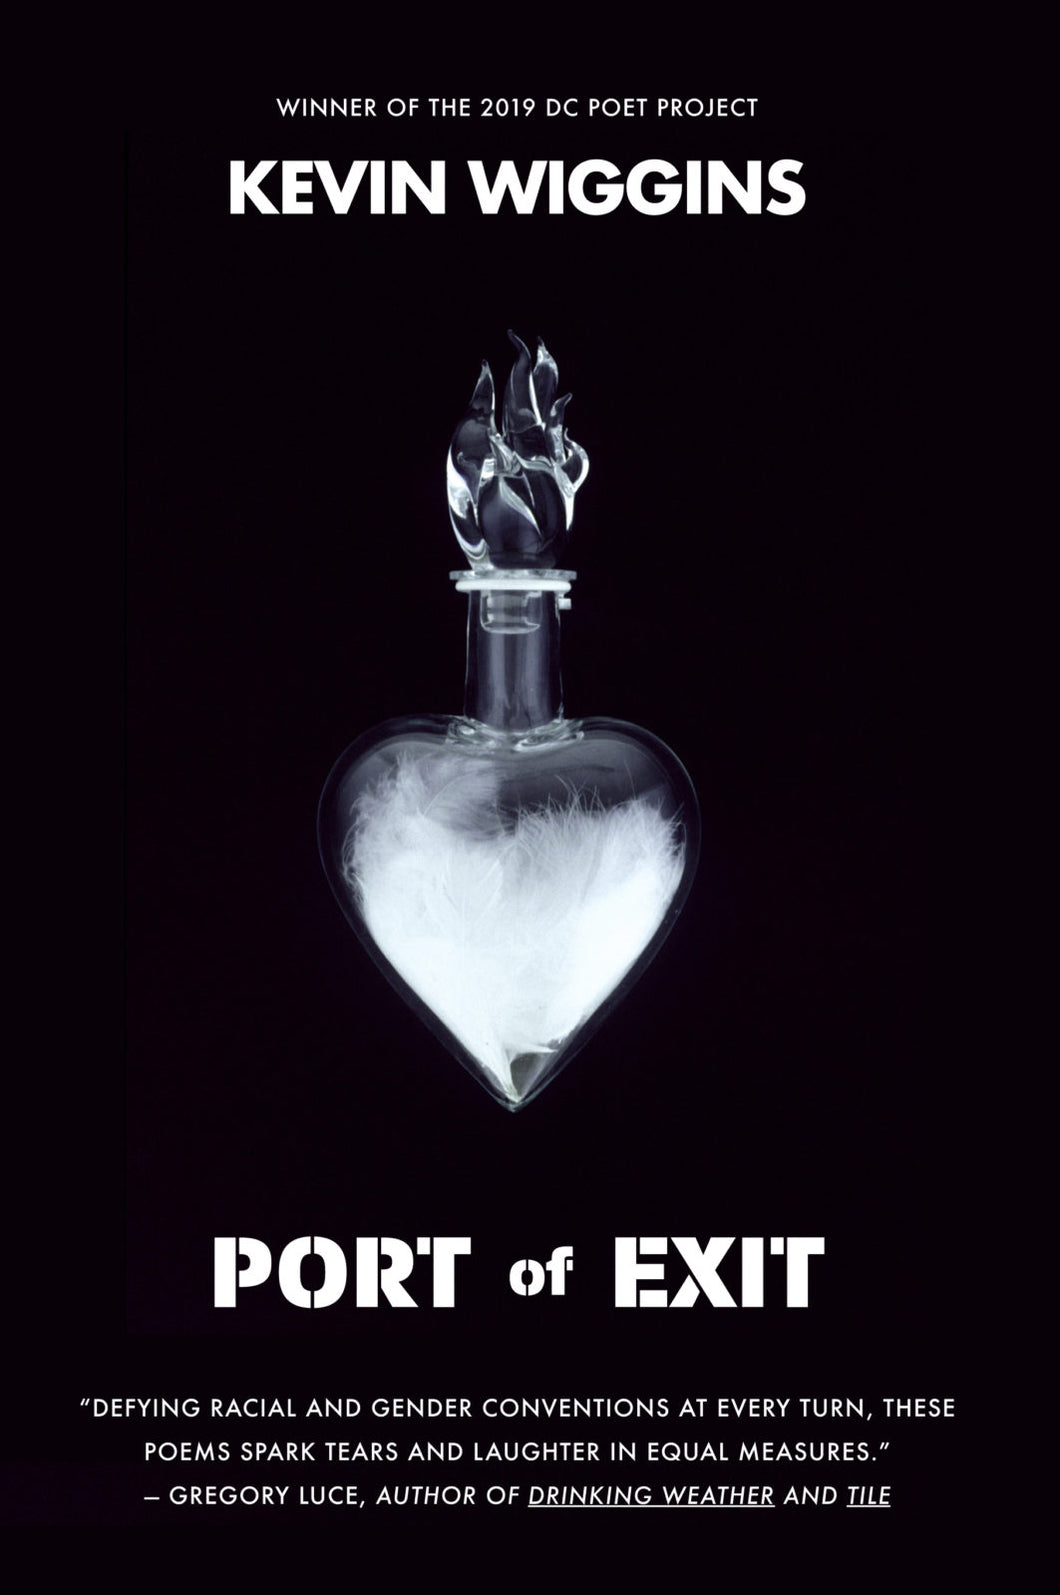 Port of Exit by Kevin Wiggins